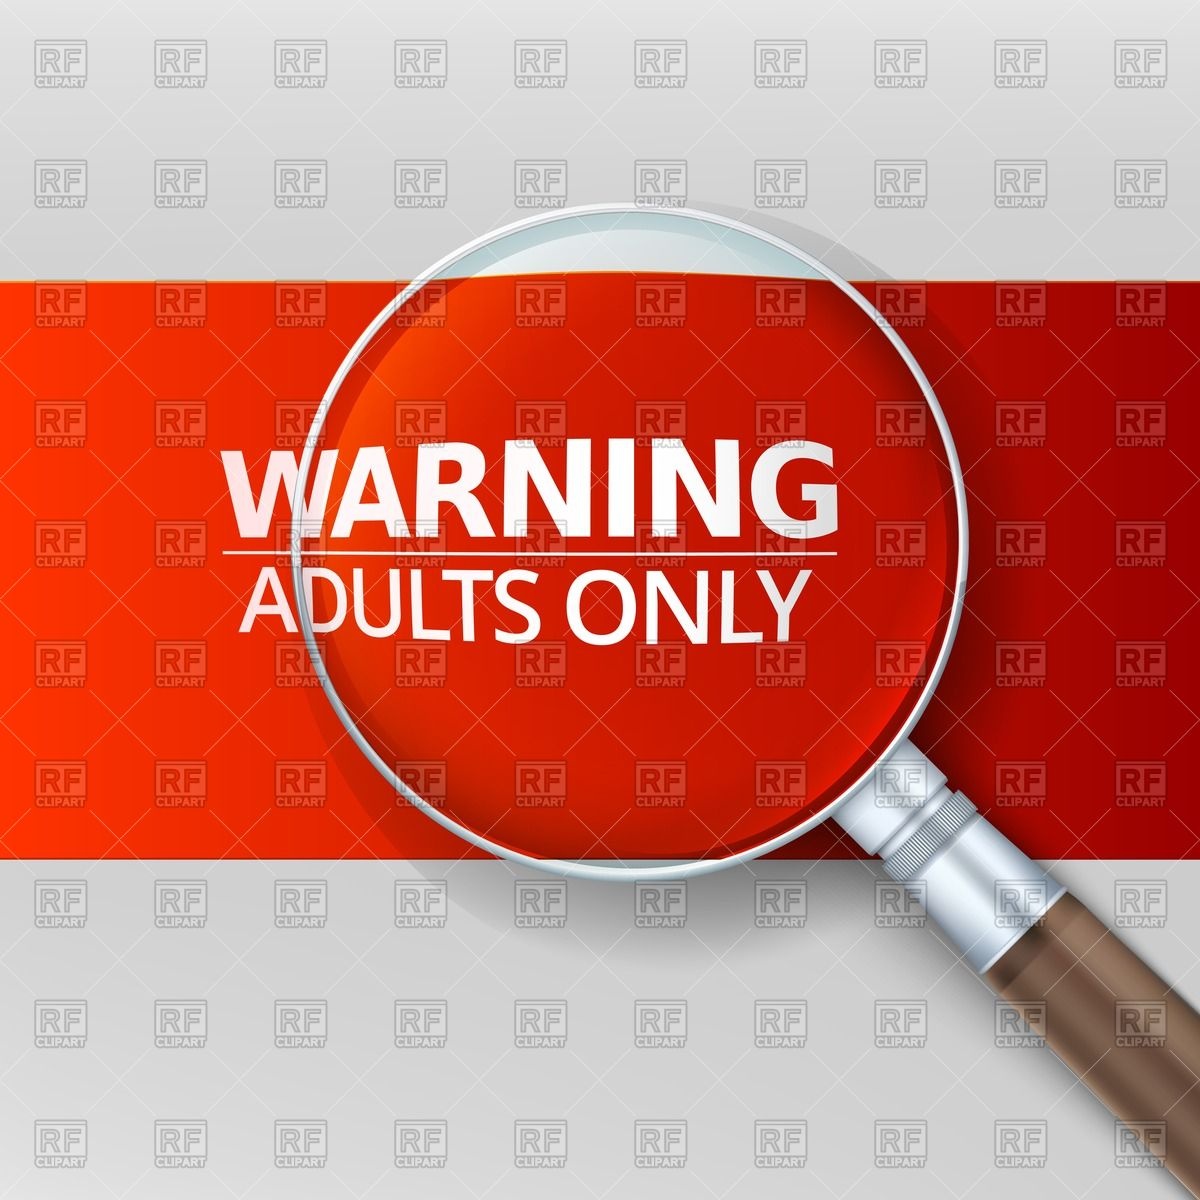 Adults Only  Warning Banner With Magnifying Glass Download Royalty